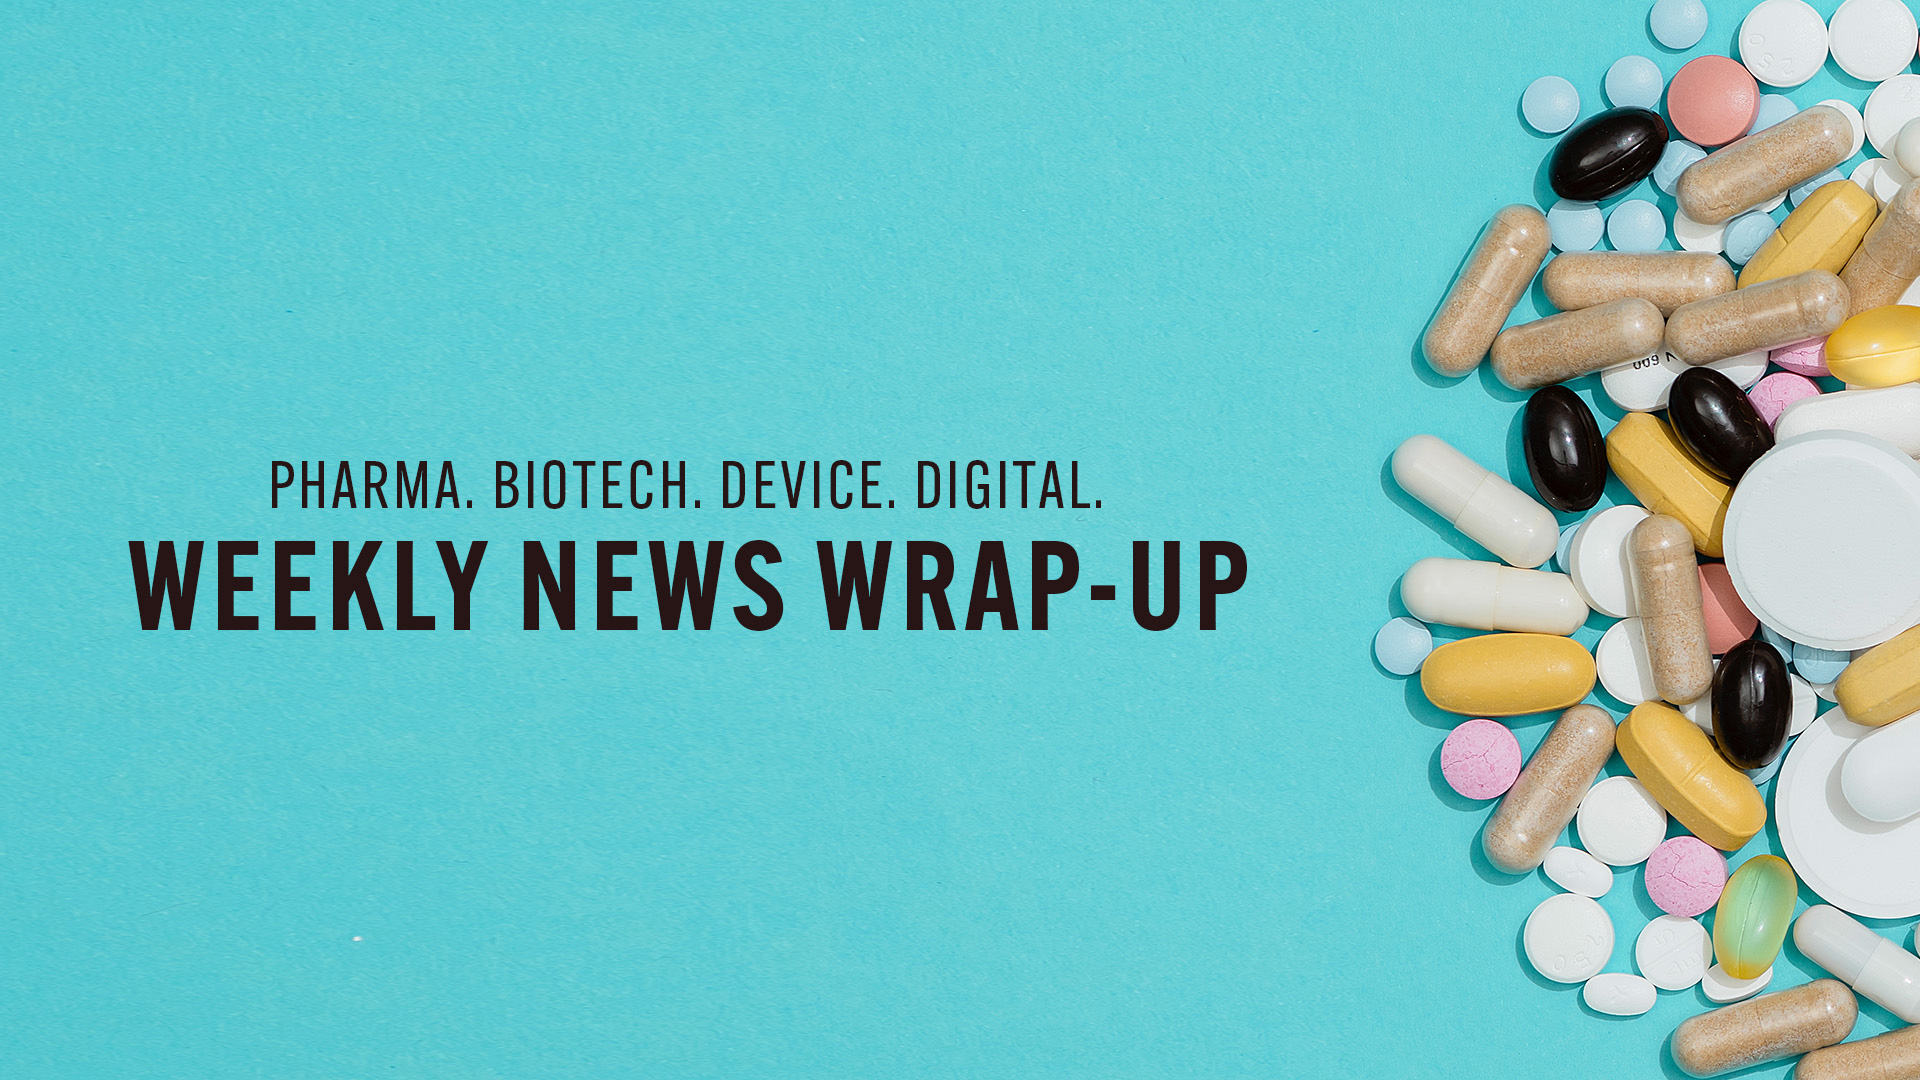 Healthcare Industry News Weekly Wrap-Up: November 18, 2022